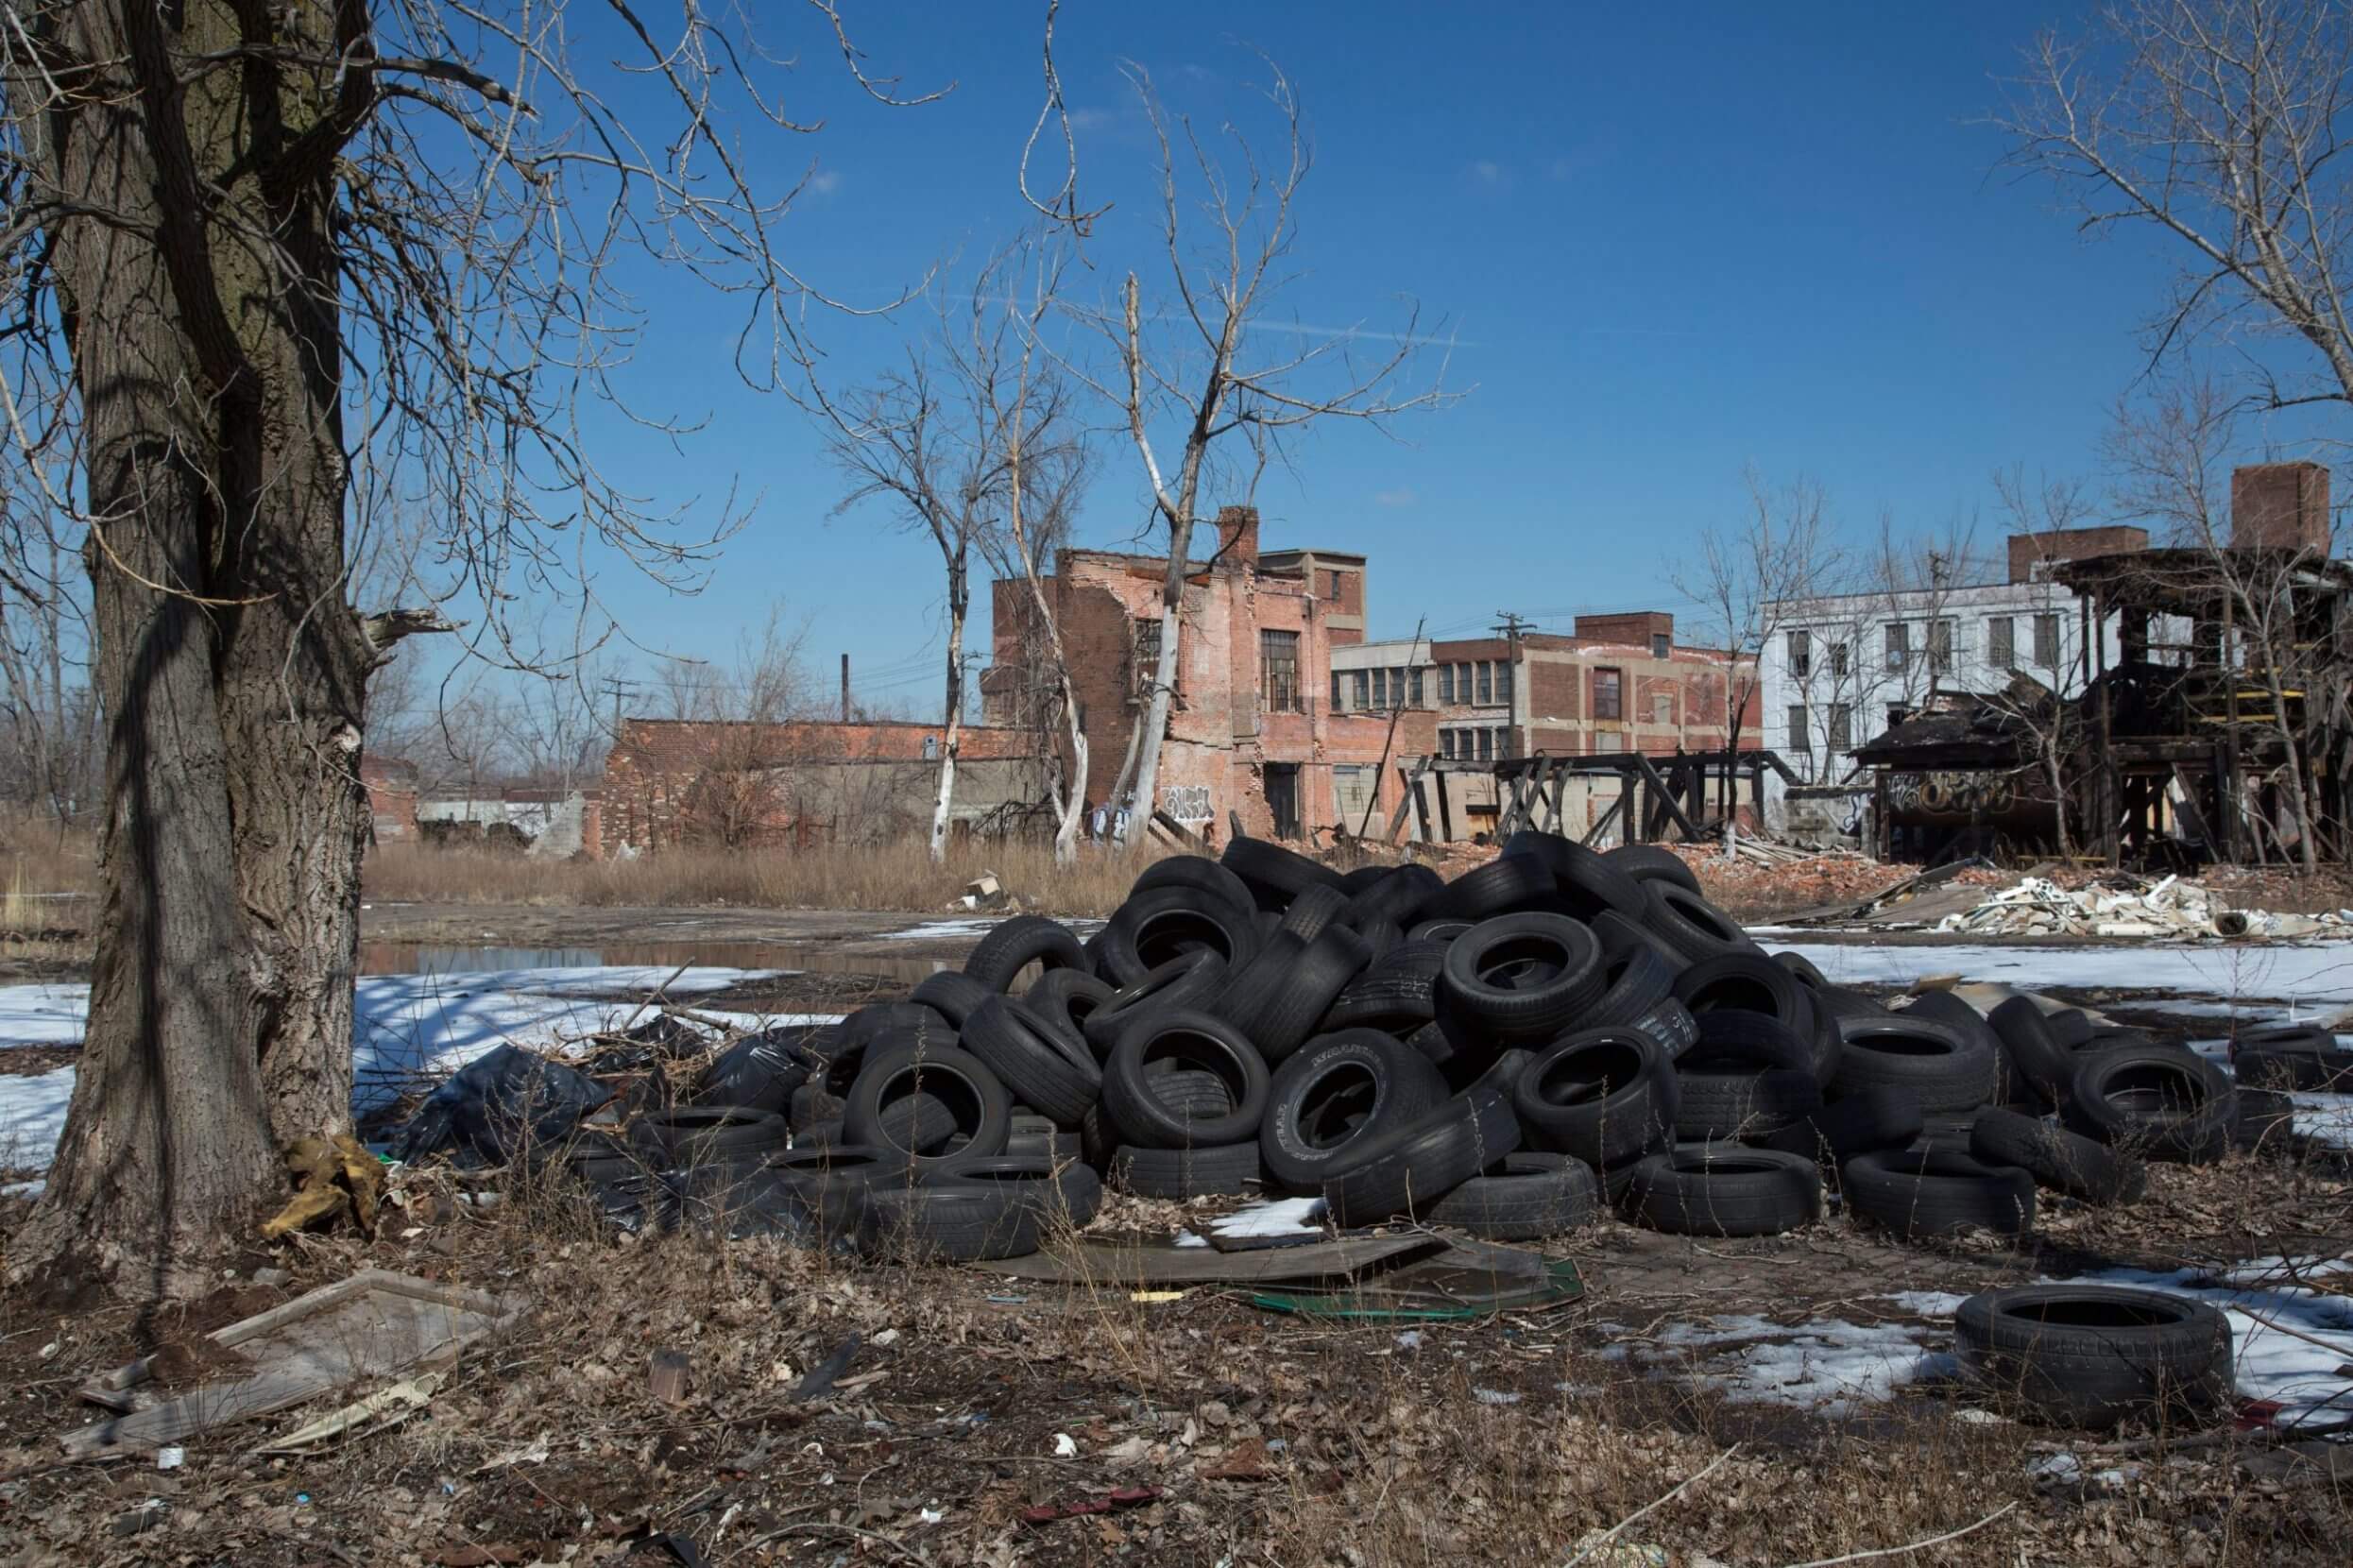 D4BN3B Detroit, Michigan - Used tires dumped on a vacant lot next to derelict buildings.